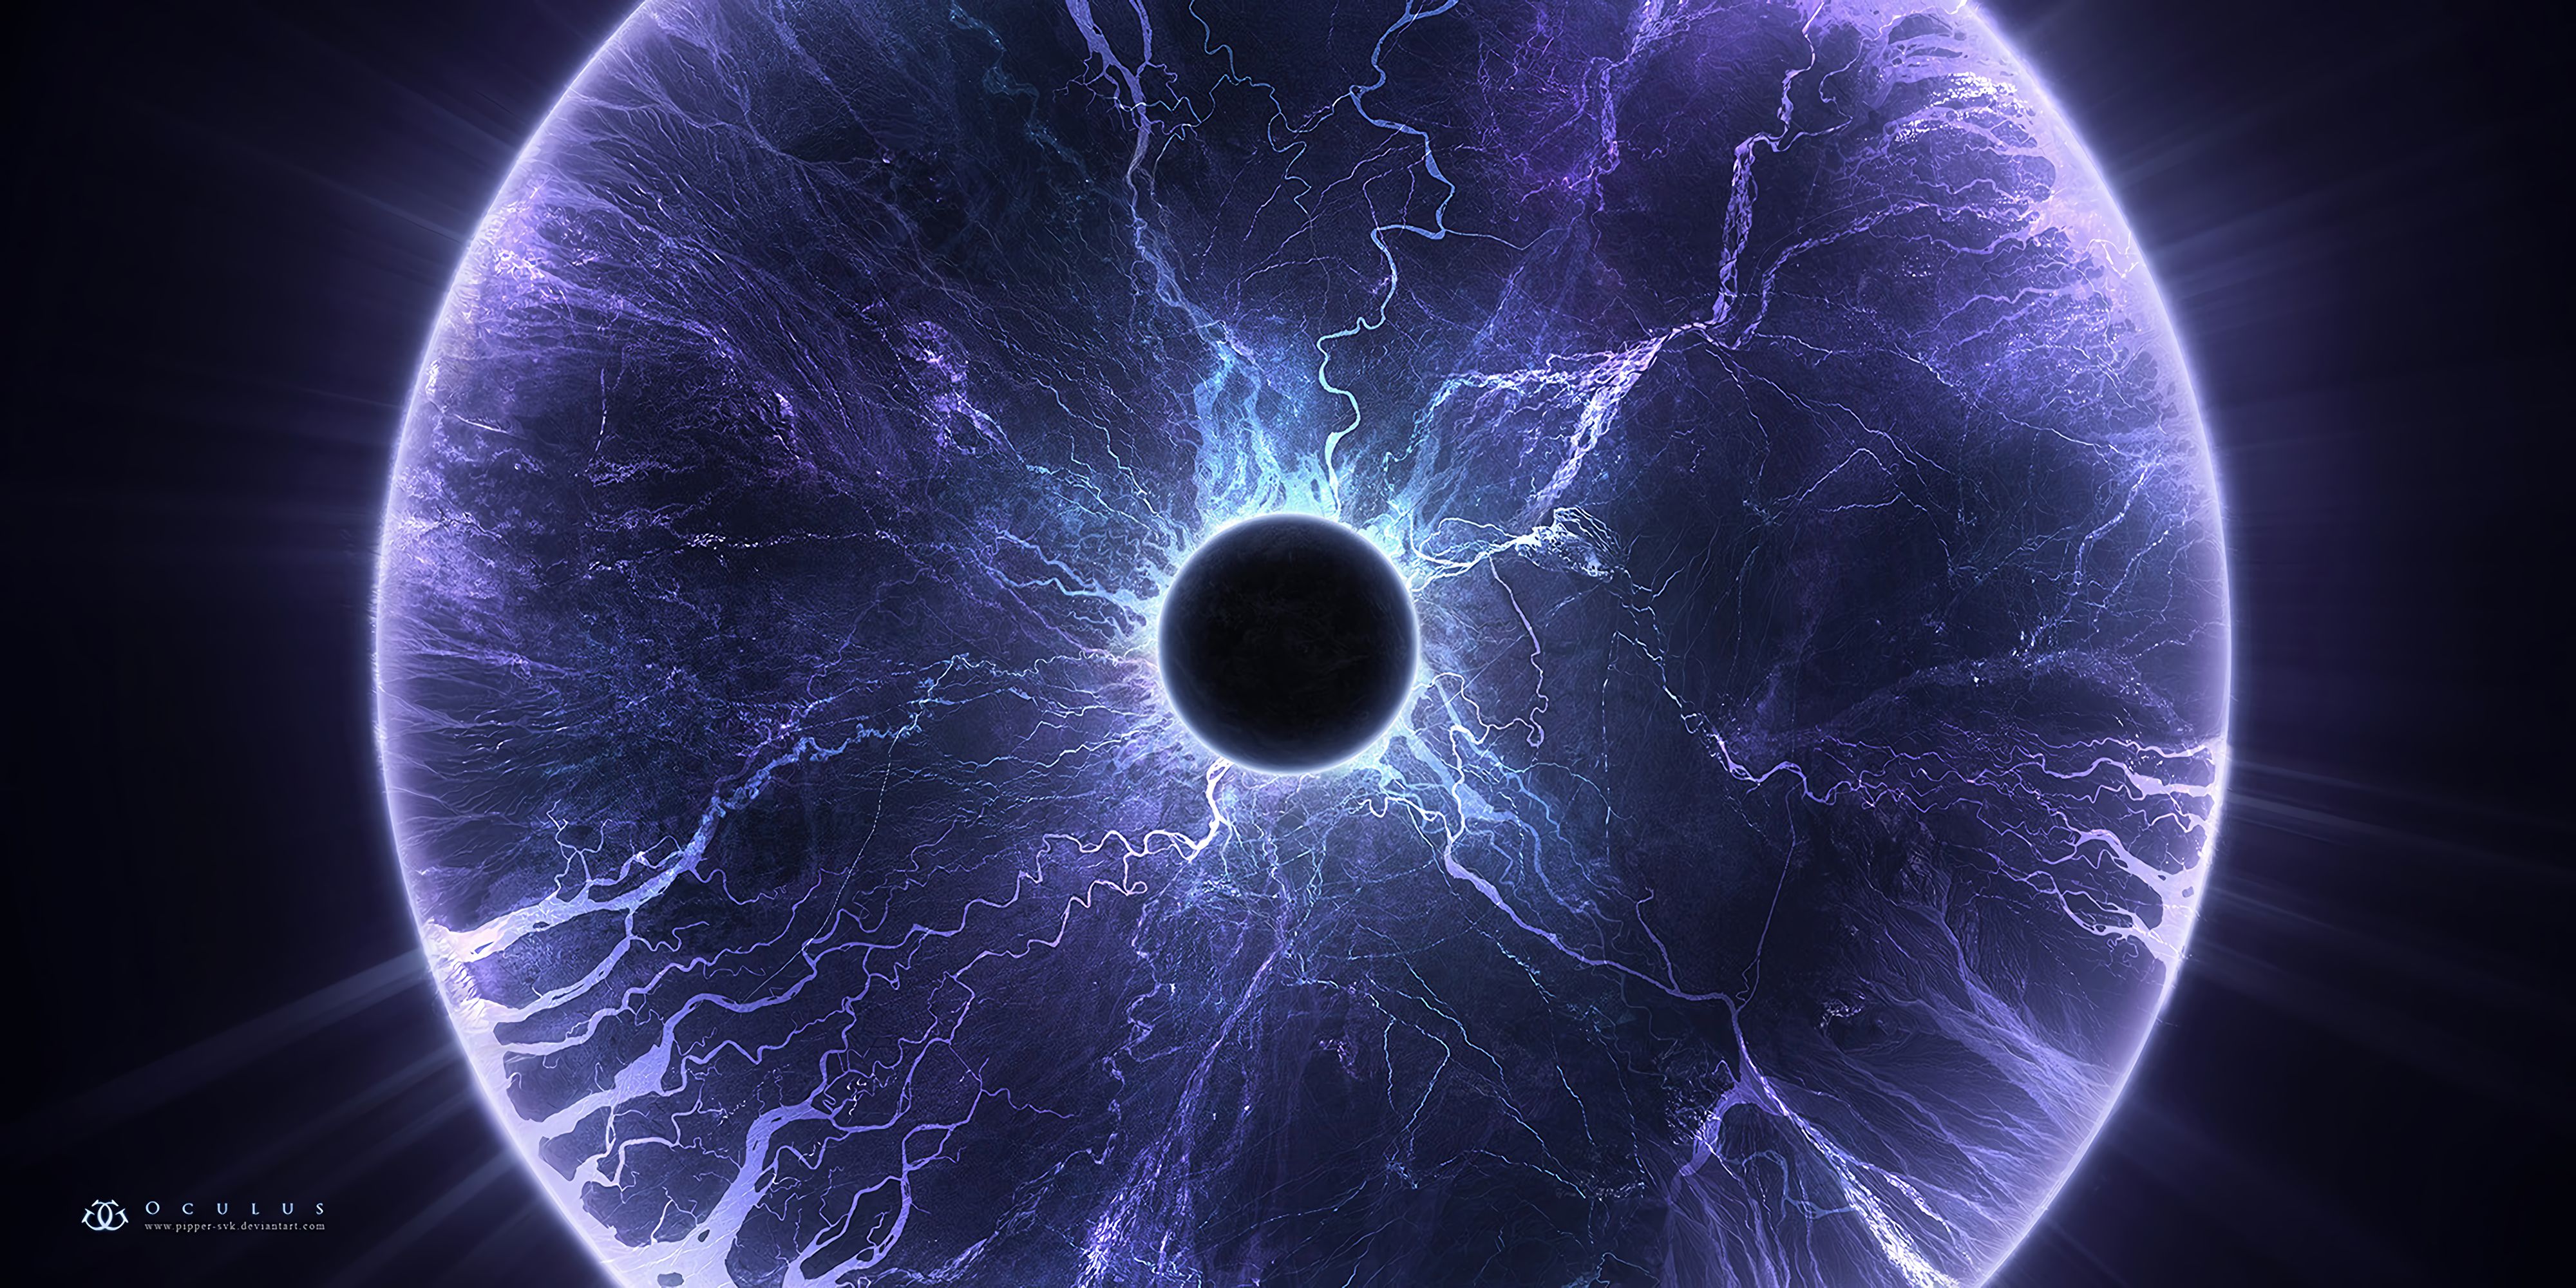 133702 free wallpaper 240x320 for phone, download images violet, lightning, glow, universe 240x320 for mobile